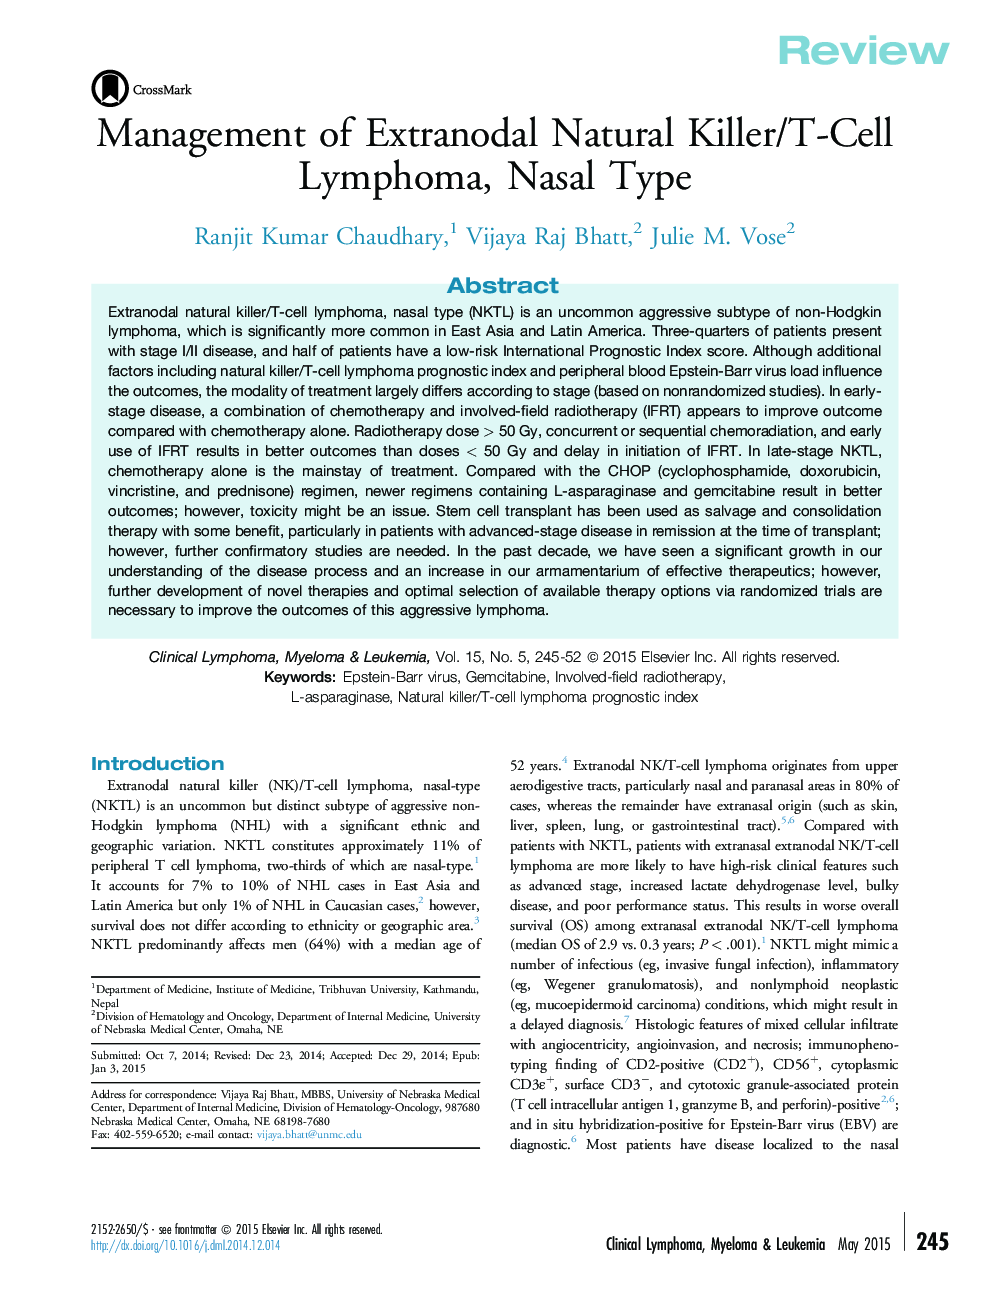 Management of Extranodal Natural Killer/T-Cell Lymphoma, Nasal Type